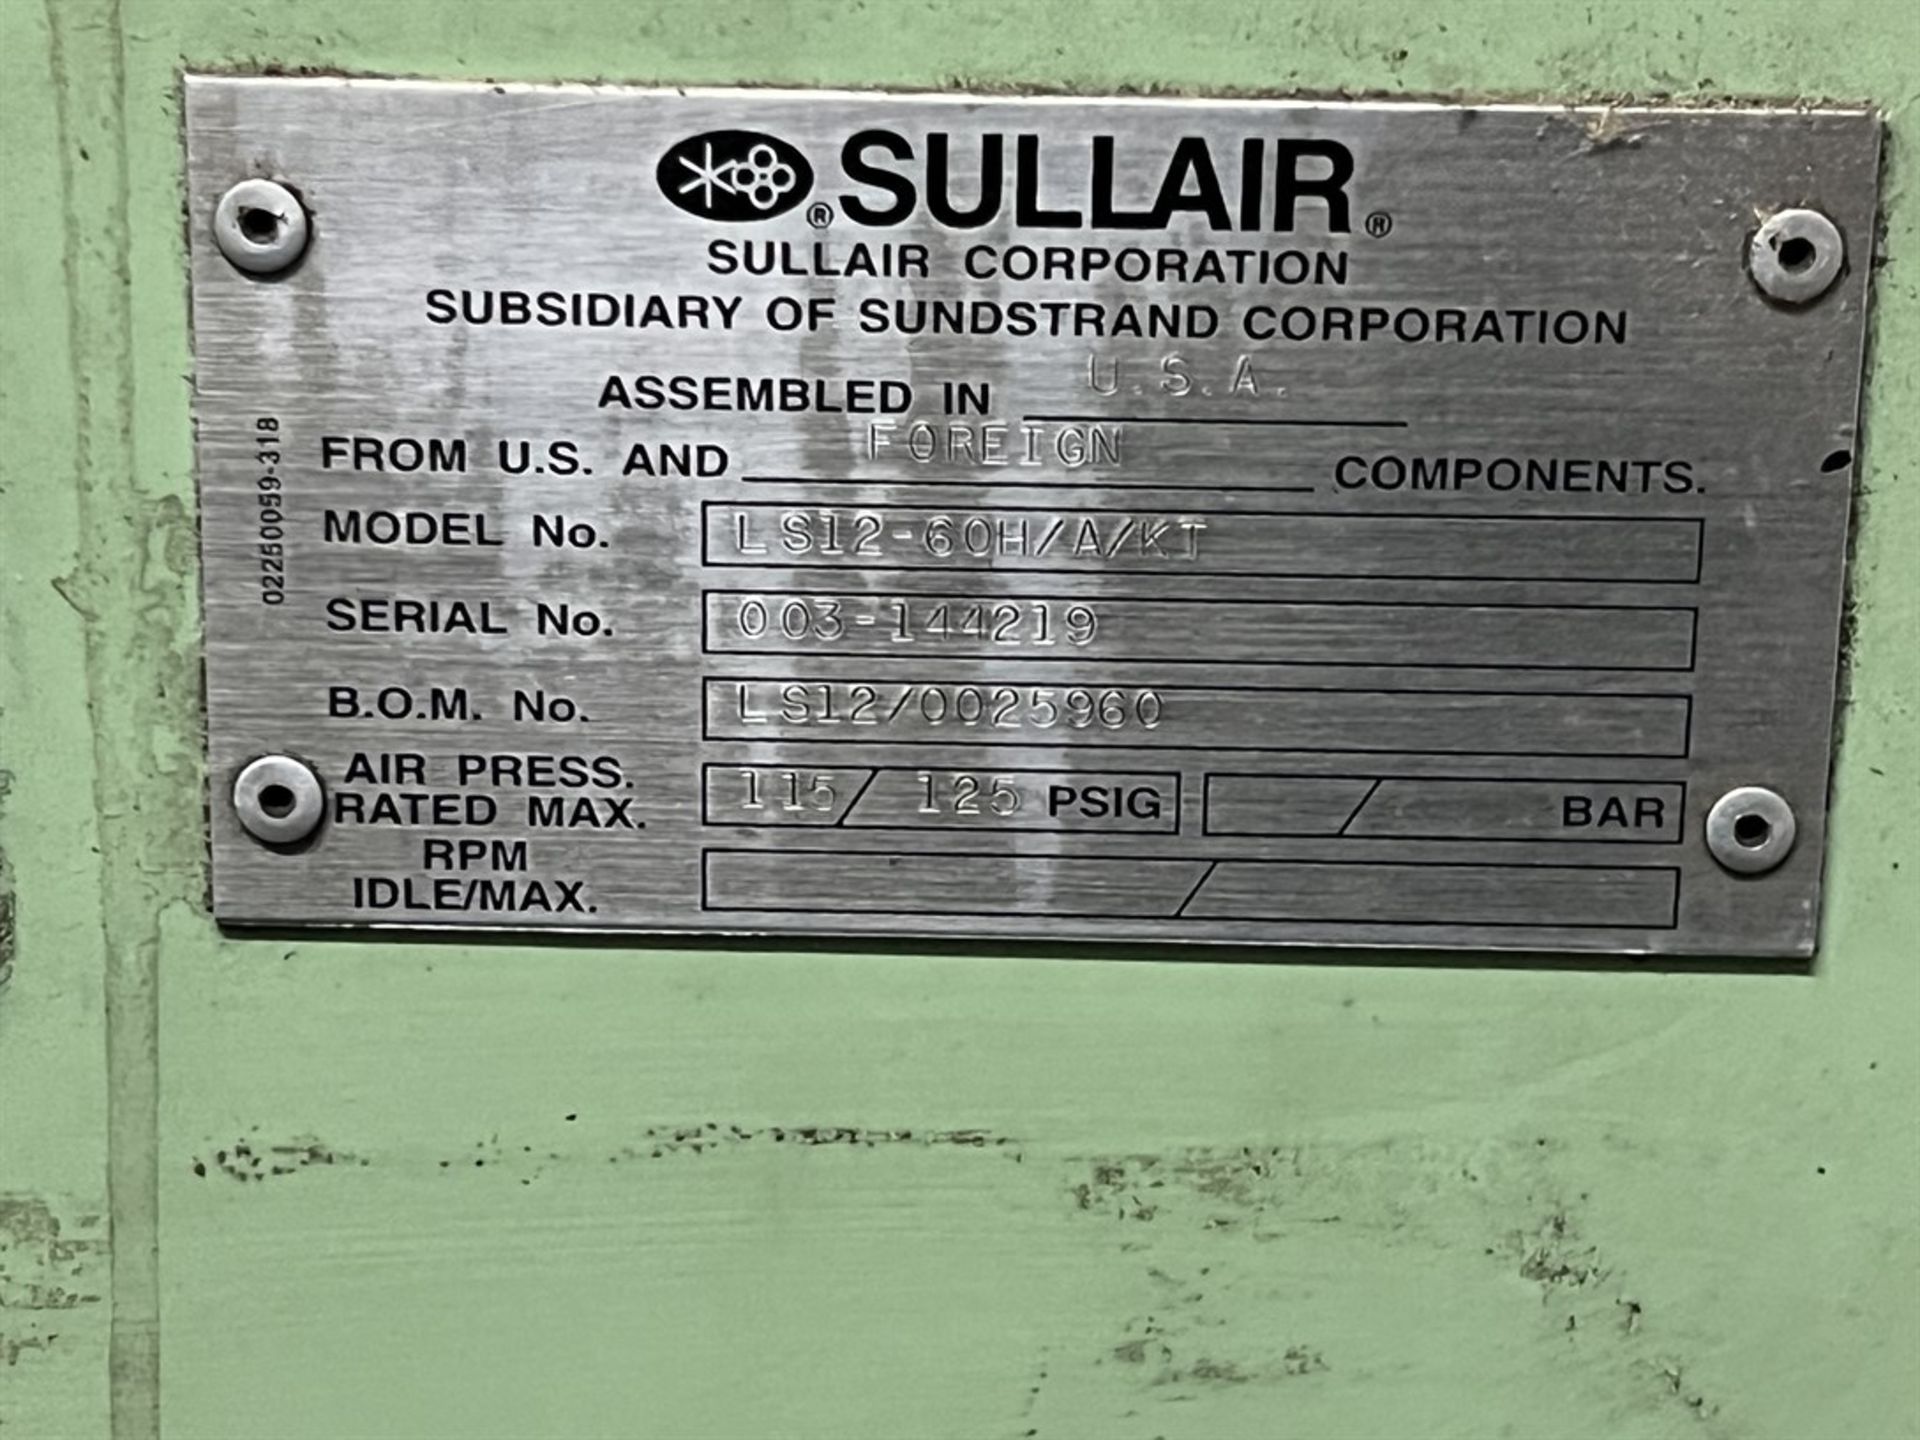 SULLAIR LS12 60 HP Air Compressor, s/n 003-144219, 115/125 PSIG - Image 4 of 8